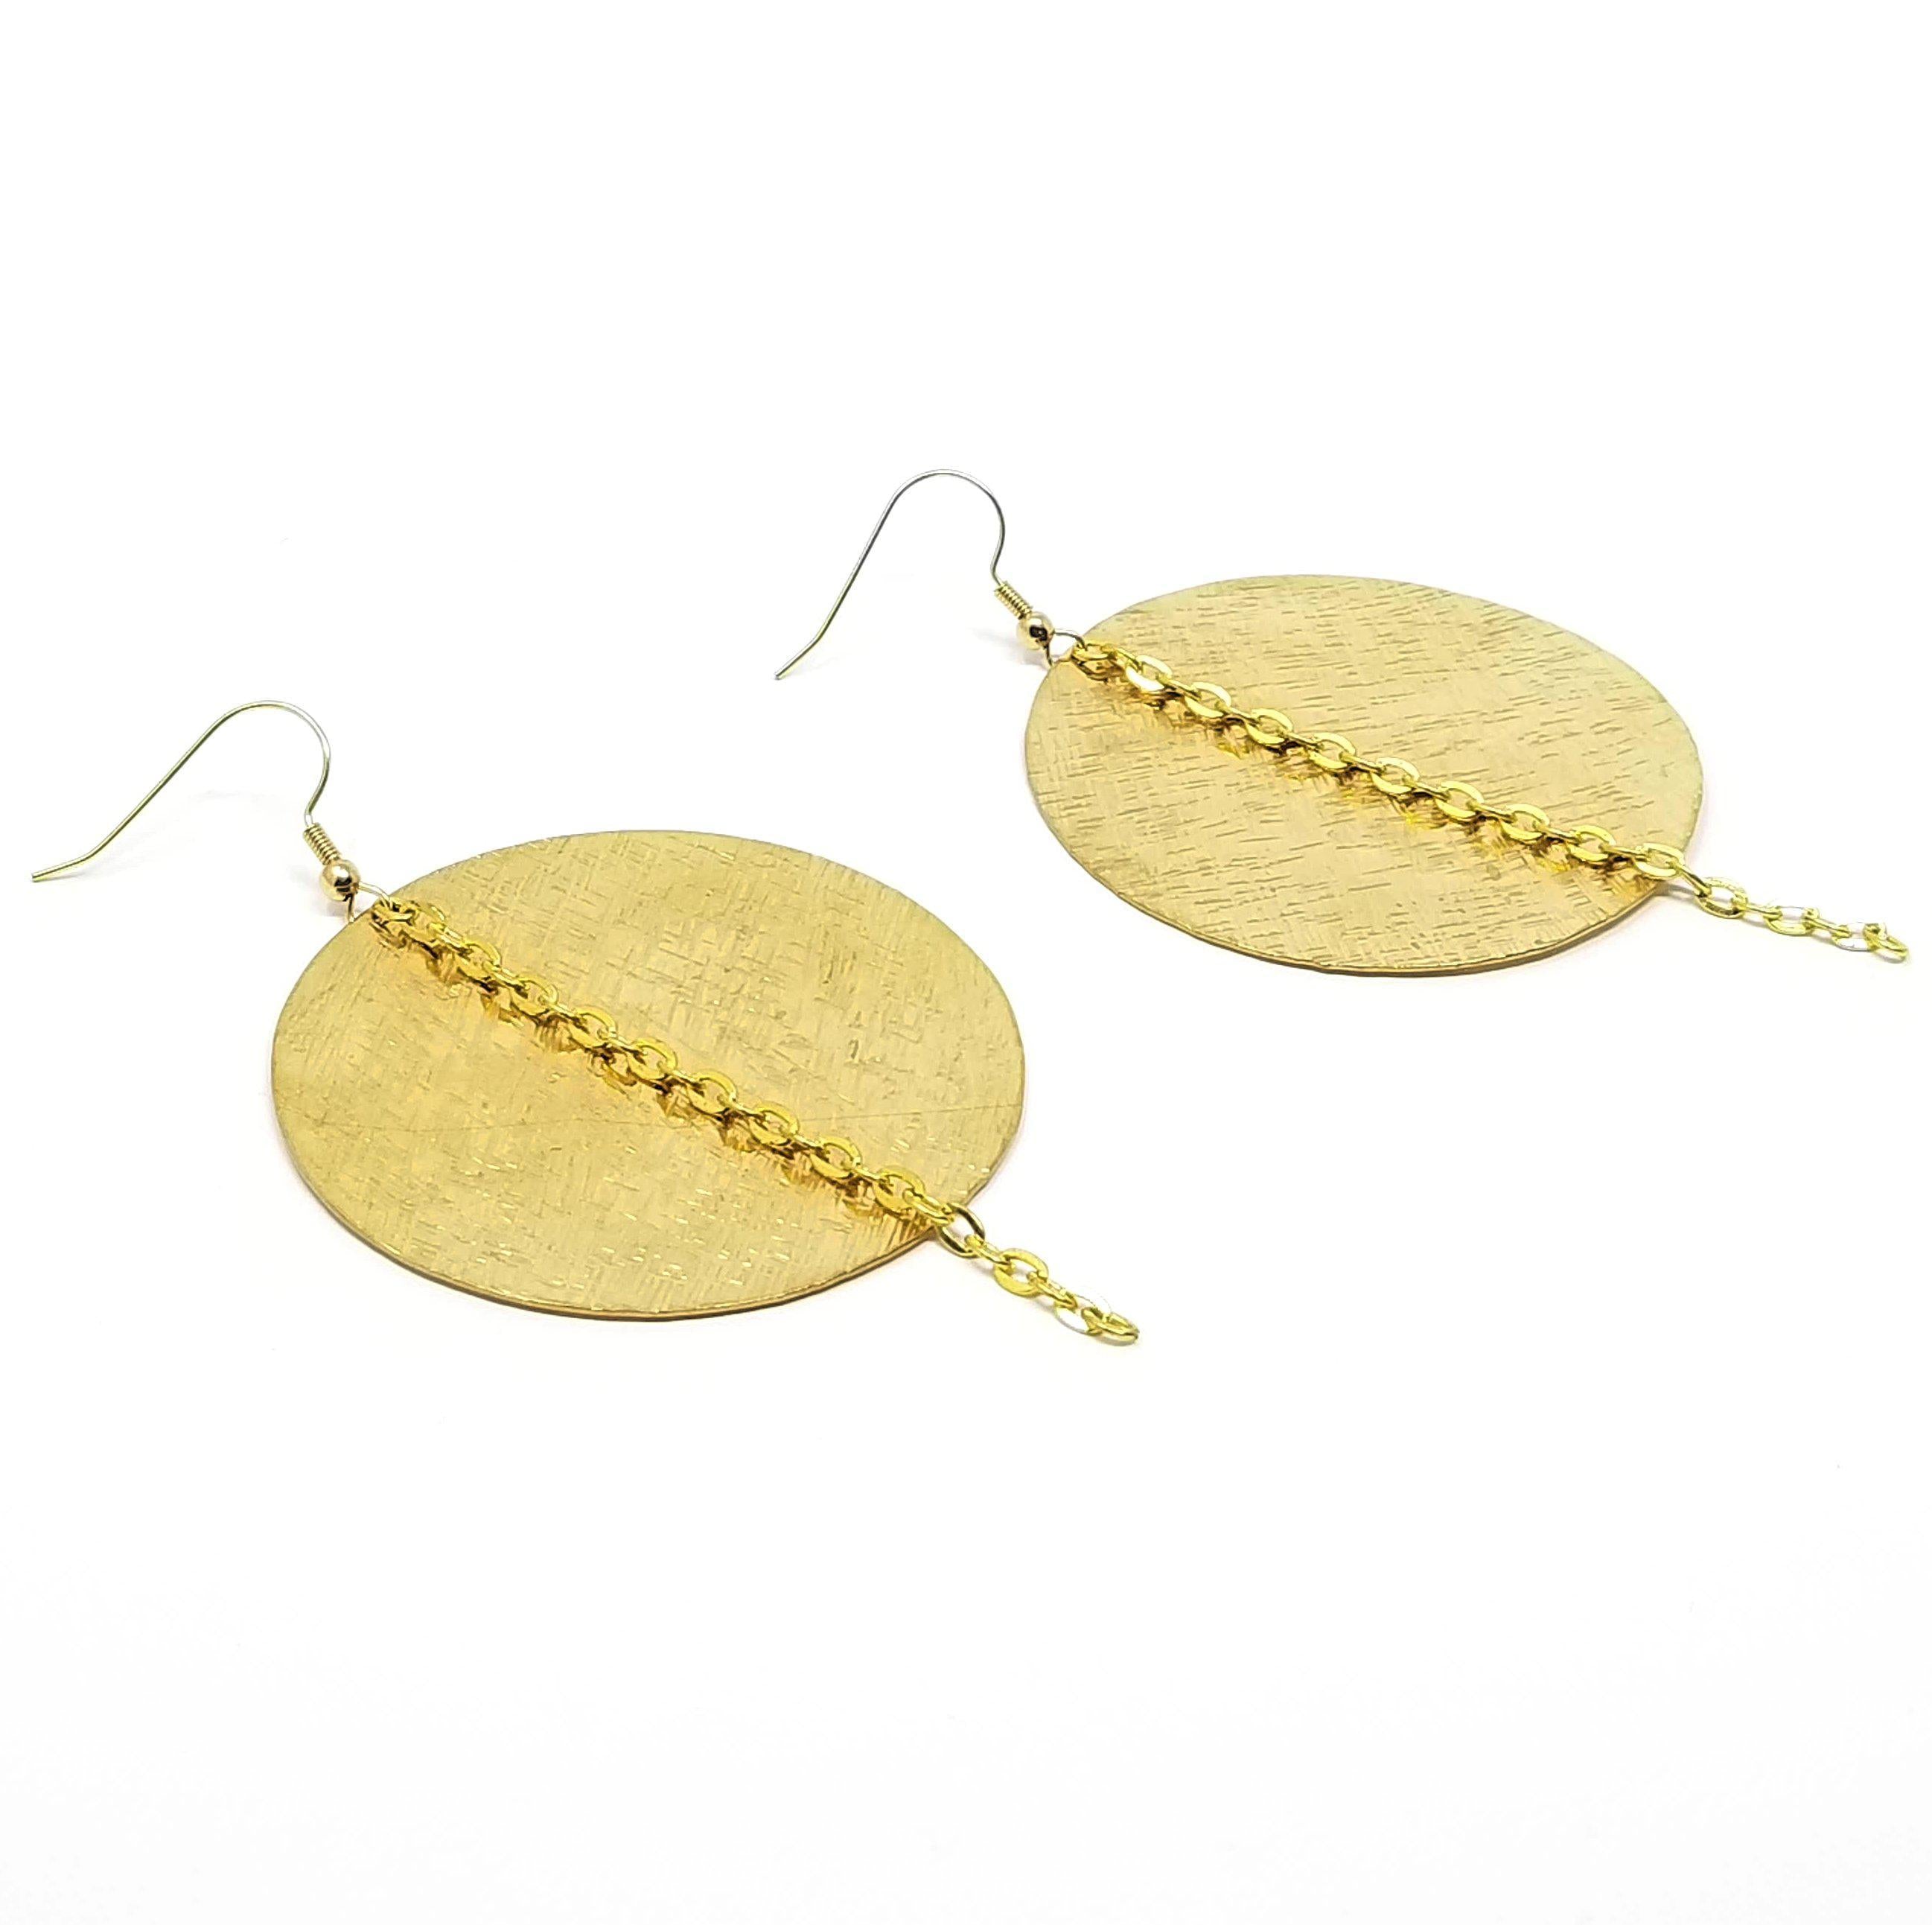 Full Moon 3 - Recycled Brass Textured Earrings